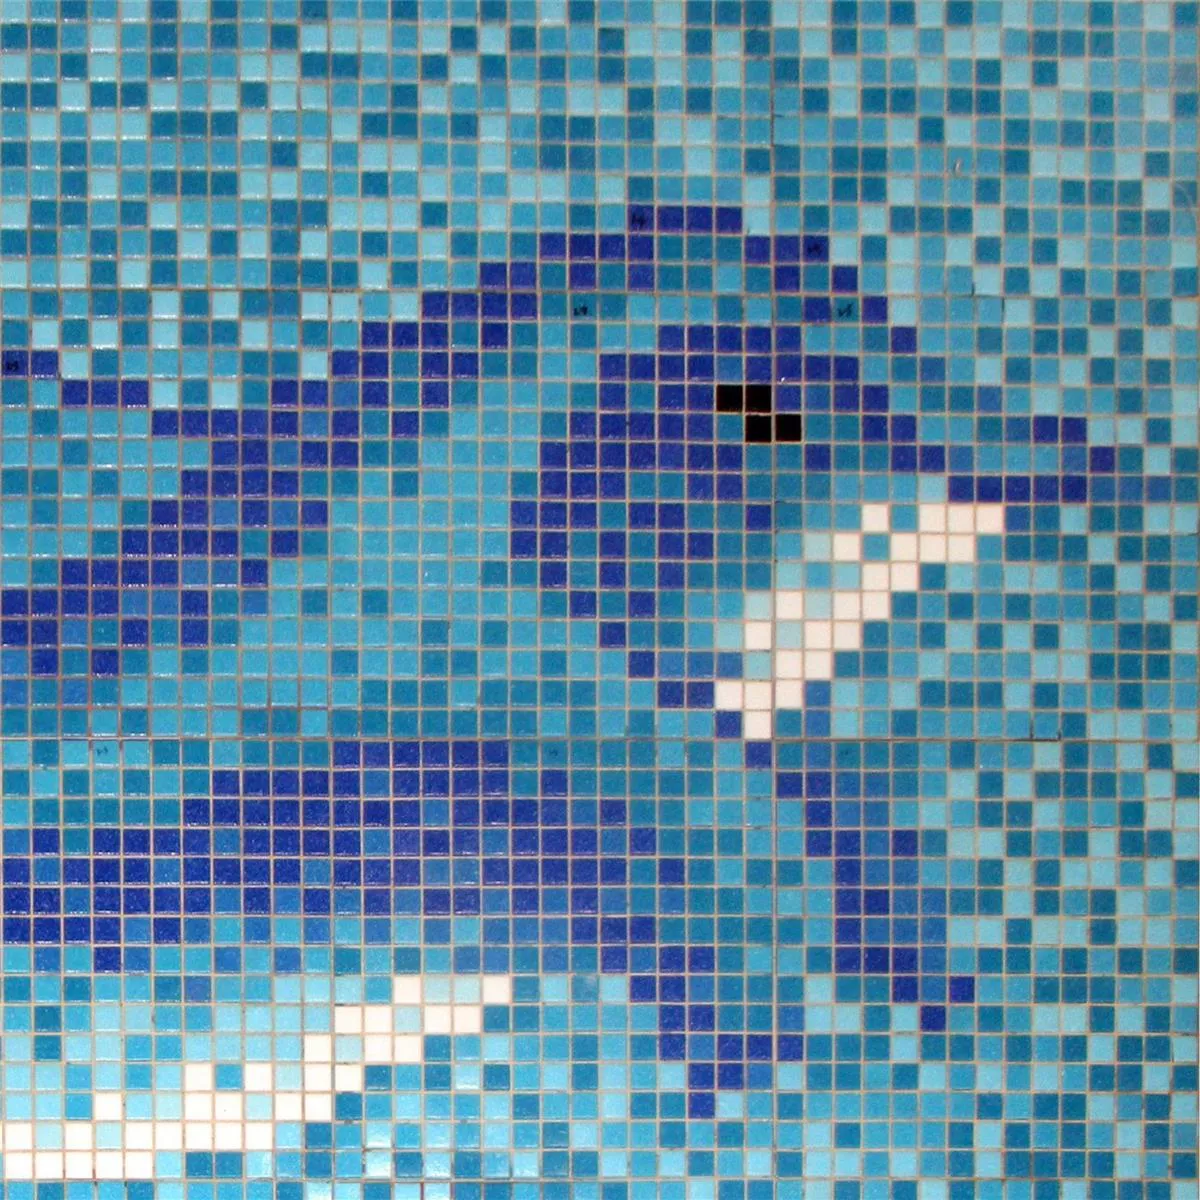 Swimming Pool Mosaic Delphin Pasted on Paper